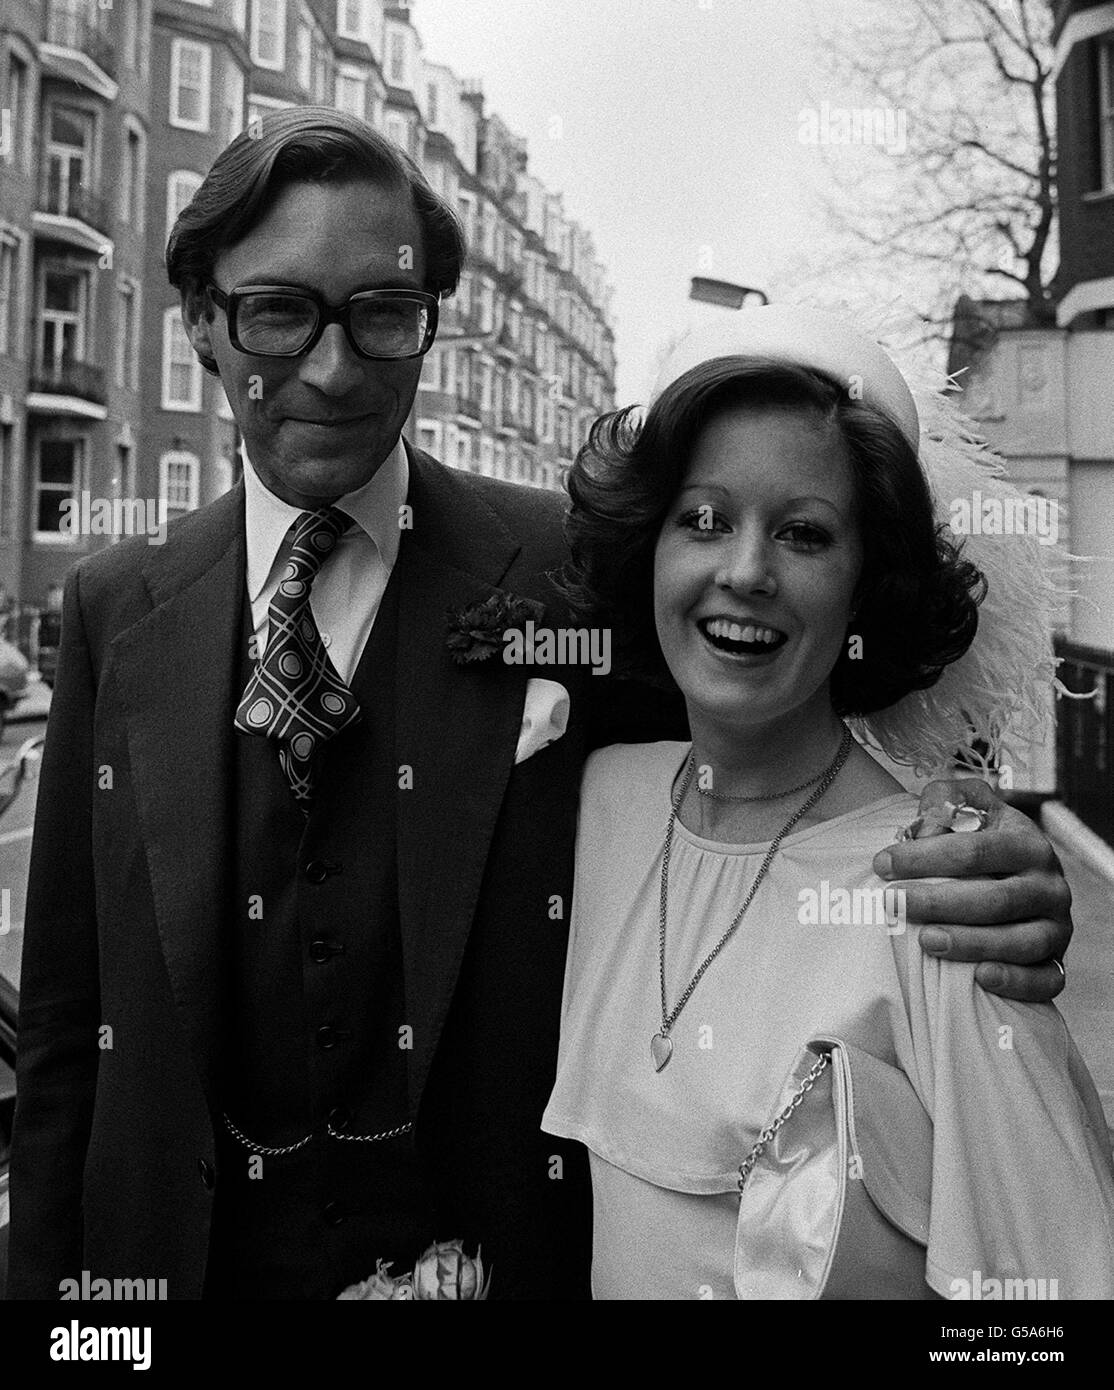 Merchant banker Richard Andrew, 33, with his 28 year old bride Lady Serena Bridgeman, the daughter of the Earl of Bradford, after their wedding at Kensington Register Office in London. Stock Photo